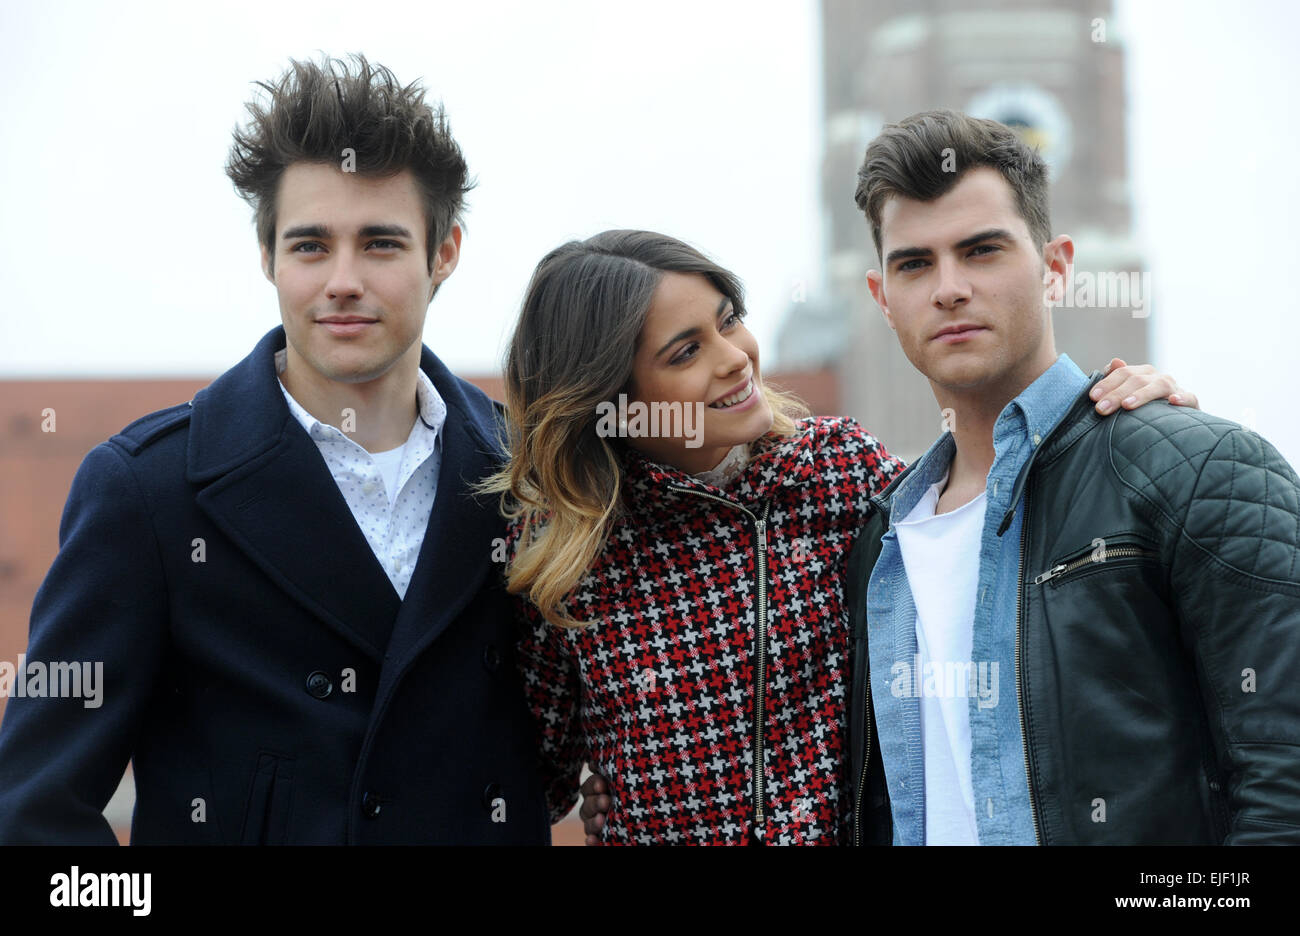 Munich, Germany. 25th Mar, 2015. Actors Jorge Blanco (Mexico, as Leon), Martina Stoessel (Argentina, as Violetta) and Diego Dominguez (Spain, as Diego) pose during a press event on the roof of a hotel in Munich, Germany, 25 March 2015. The actors are promoting the new Disney TV show 'Violetta' in Germany. PHOTO: TOBIAS HASE/dpa/Alamy Live News Stock Photo